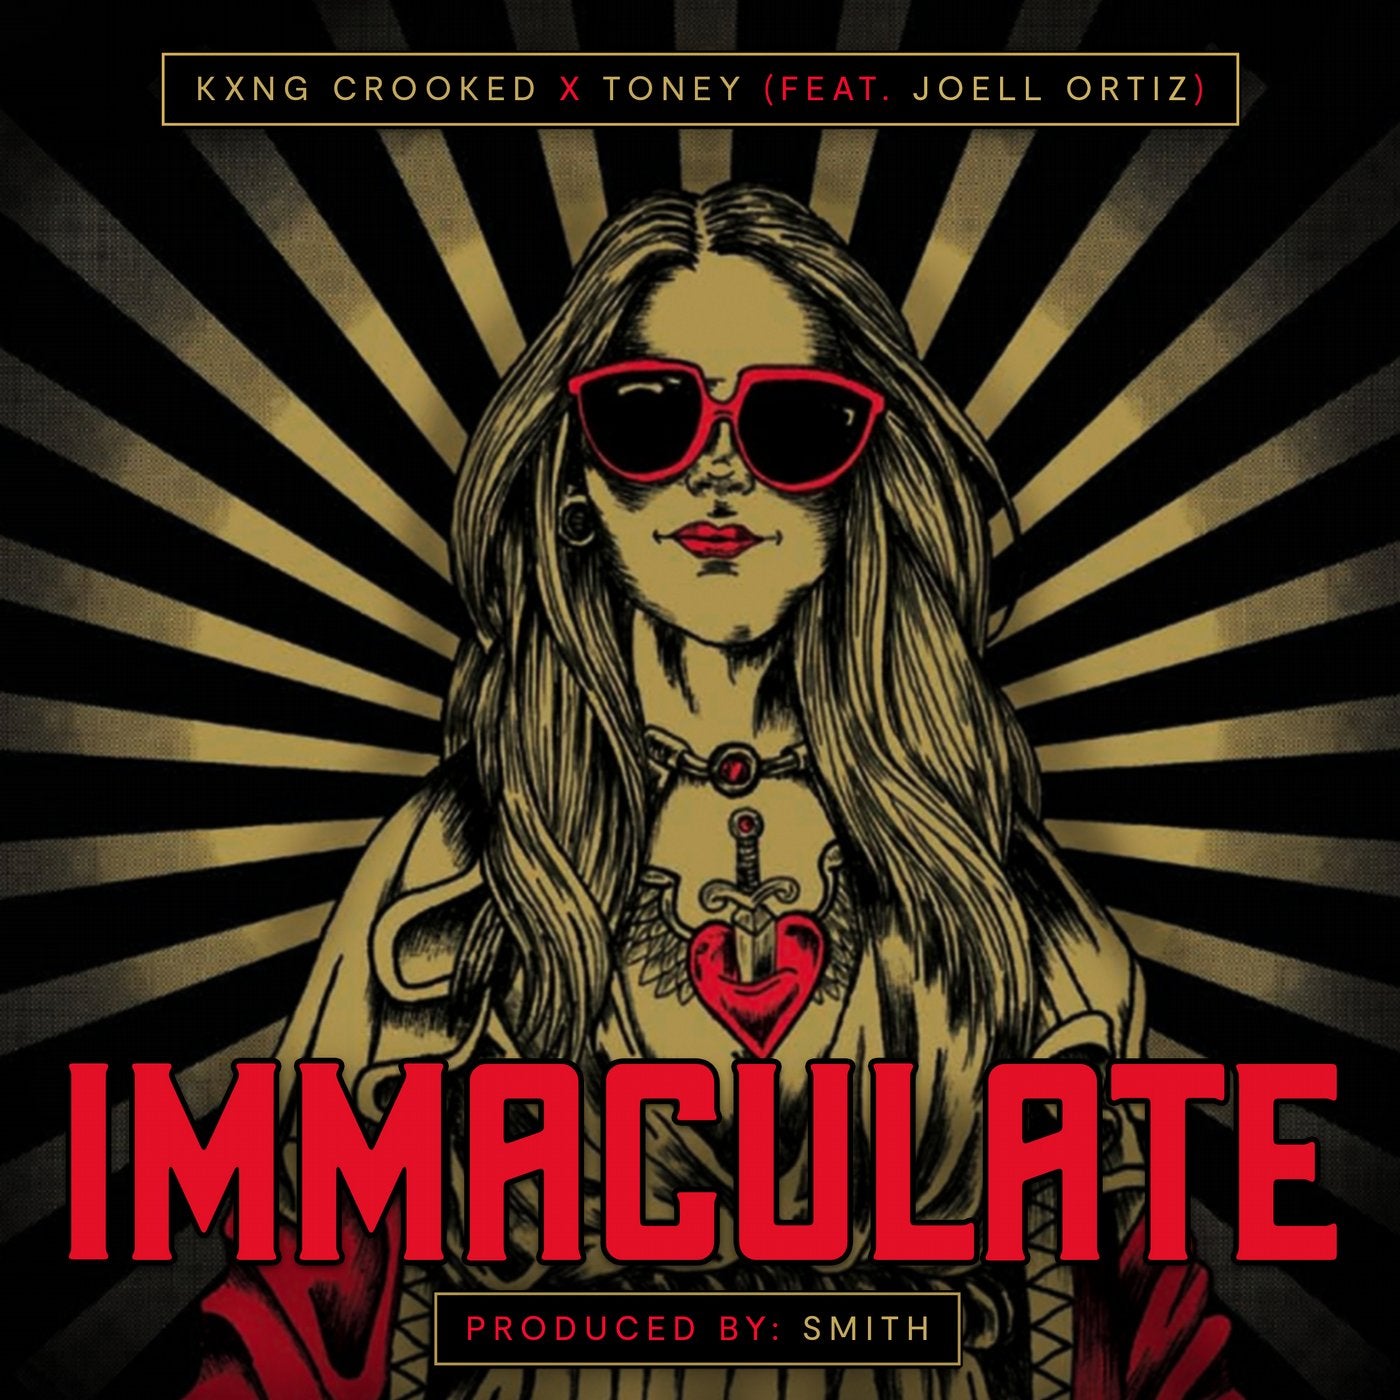 Immaculate (feat. Joell Ortiz)